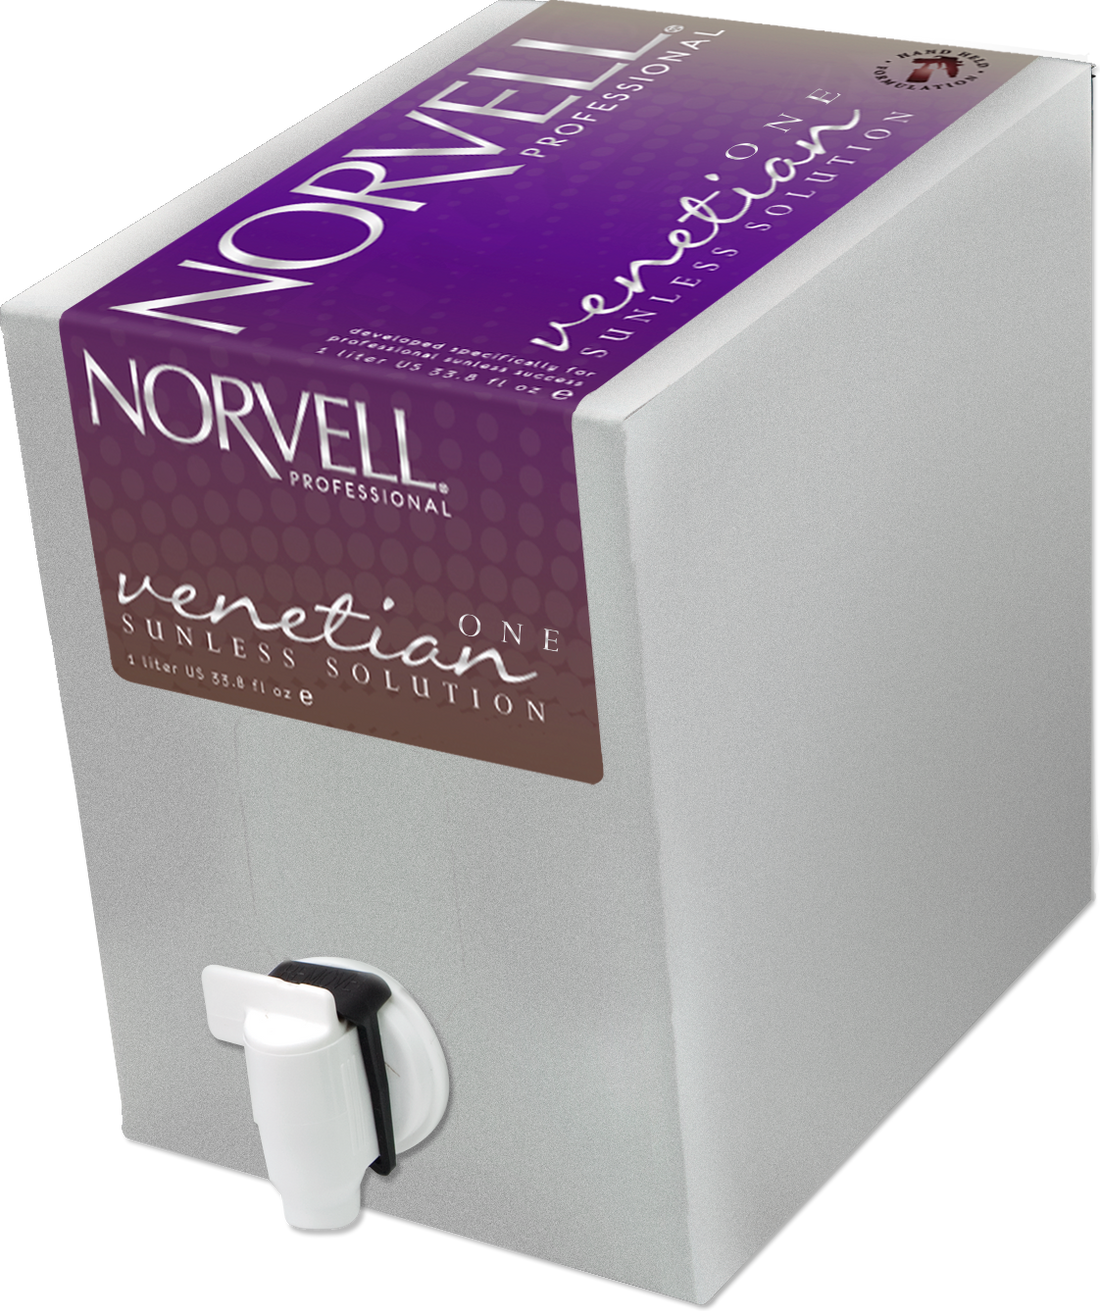 Norvell Venetian ONE shower in as little as One Hour!